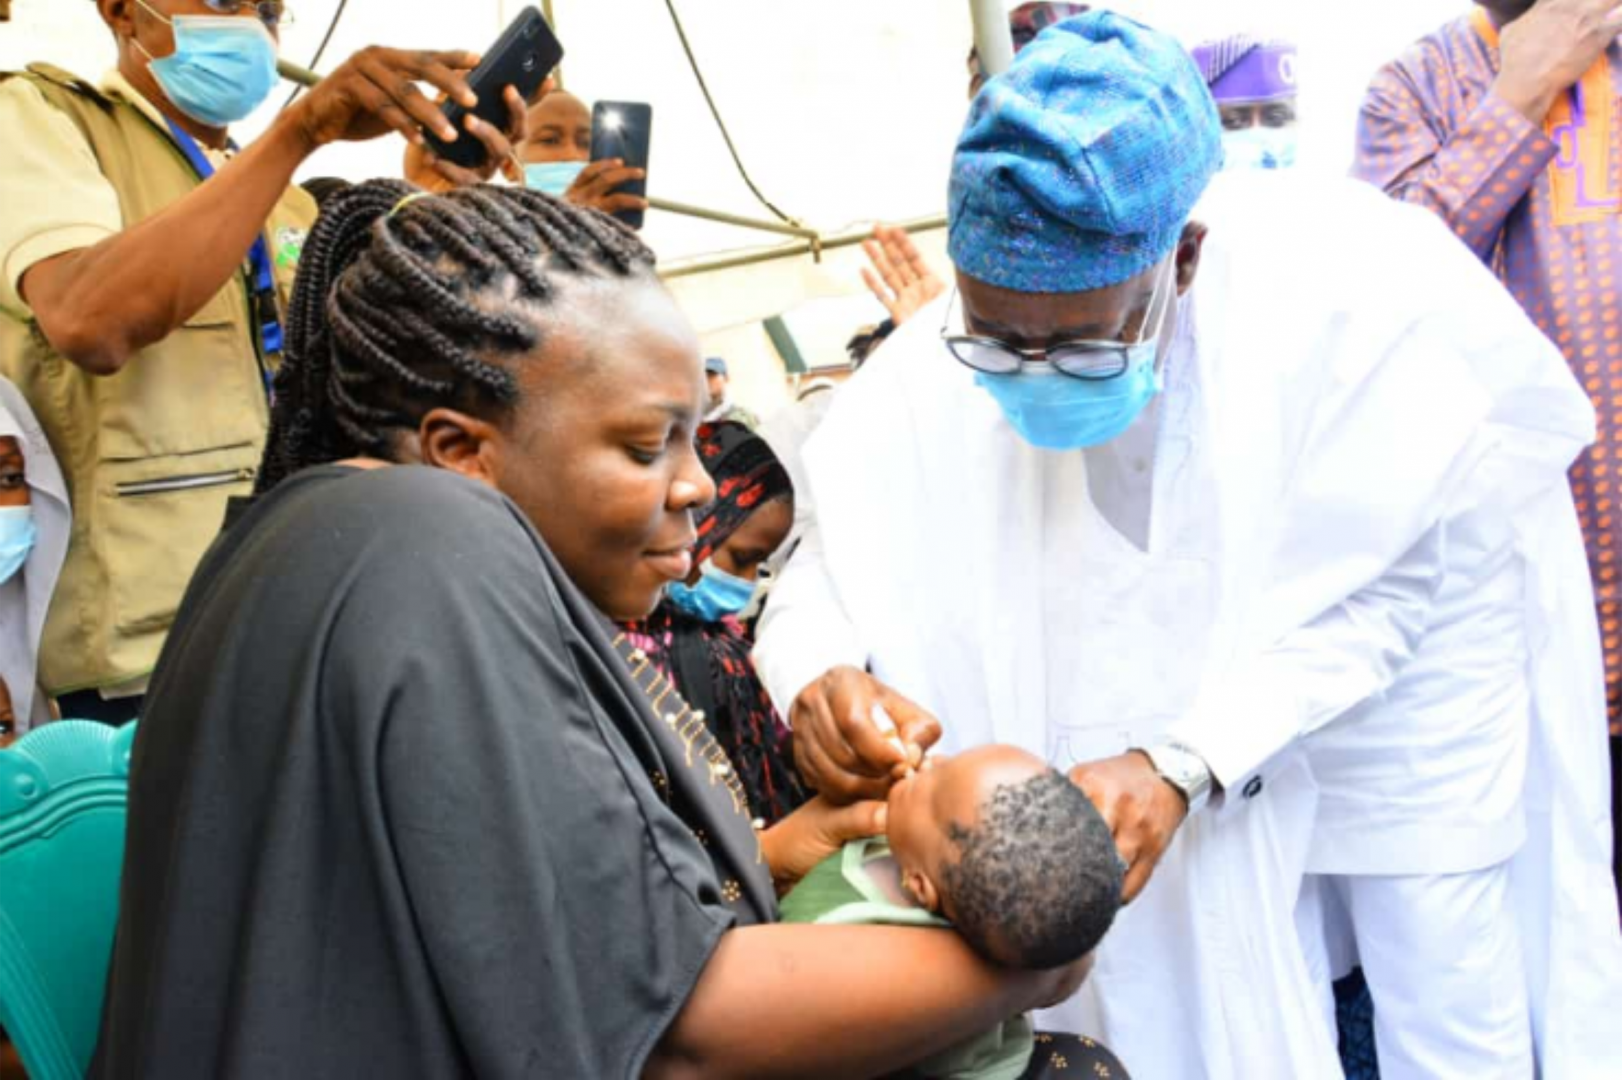 Osun State Governor Oyetola vaccinating a child at the flag-off nOPV vaccination campaign in the state.